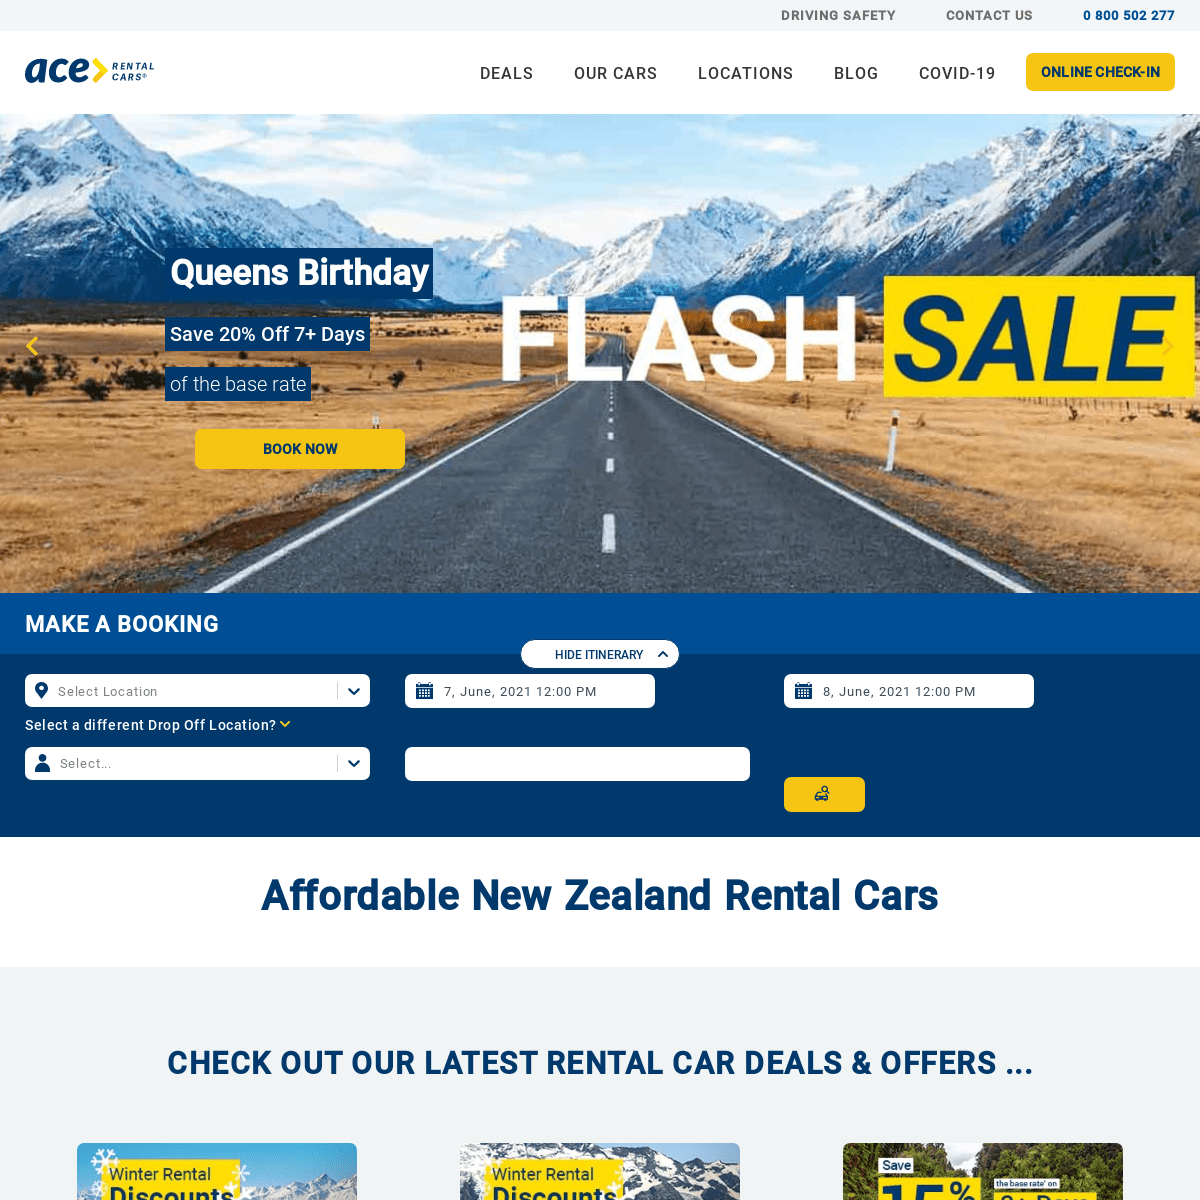 A complete backup of https://acerentalcars.co.nz